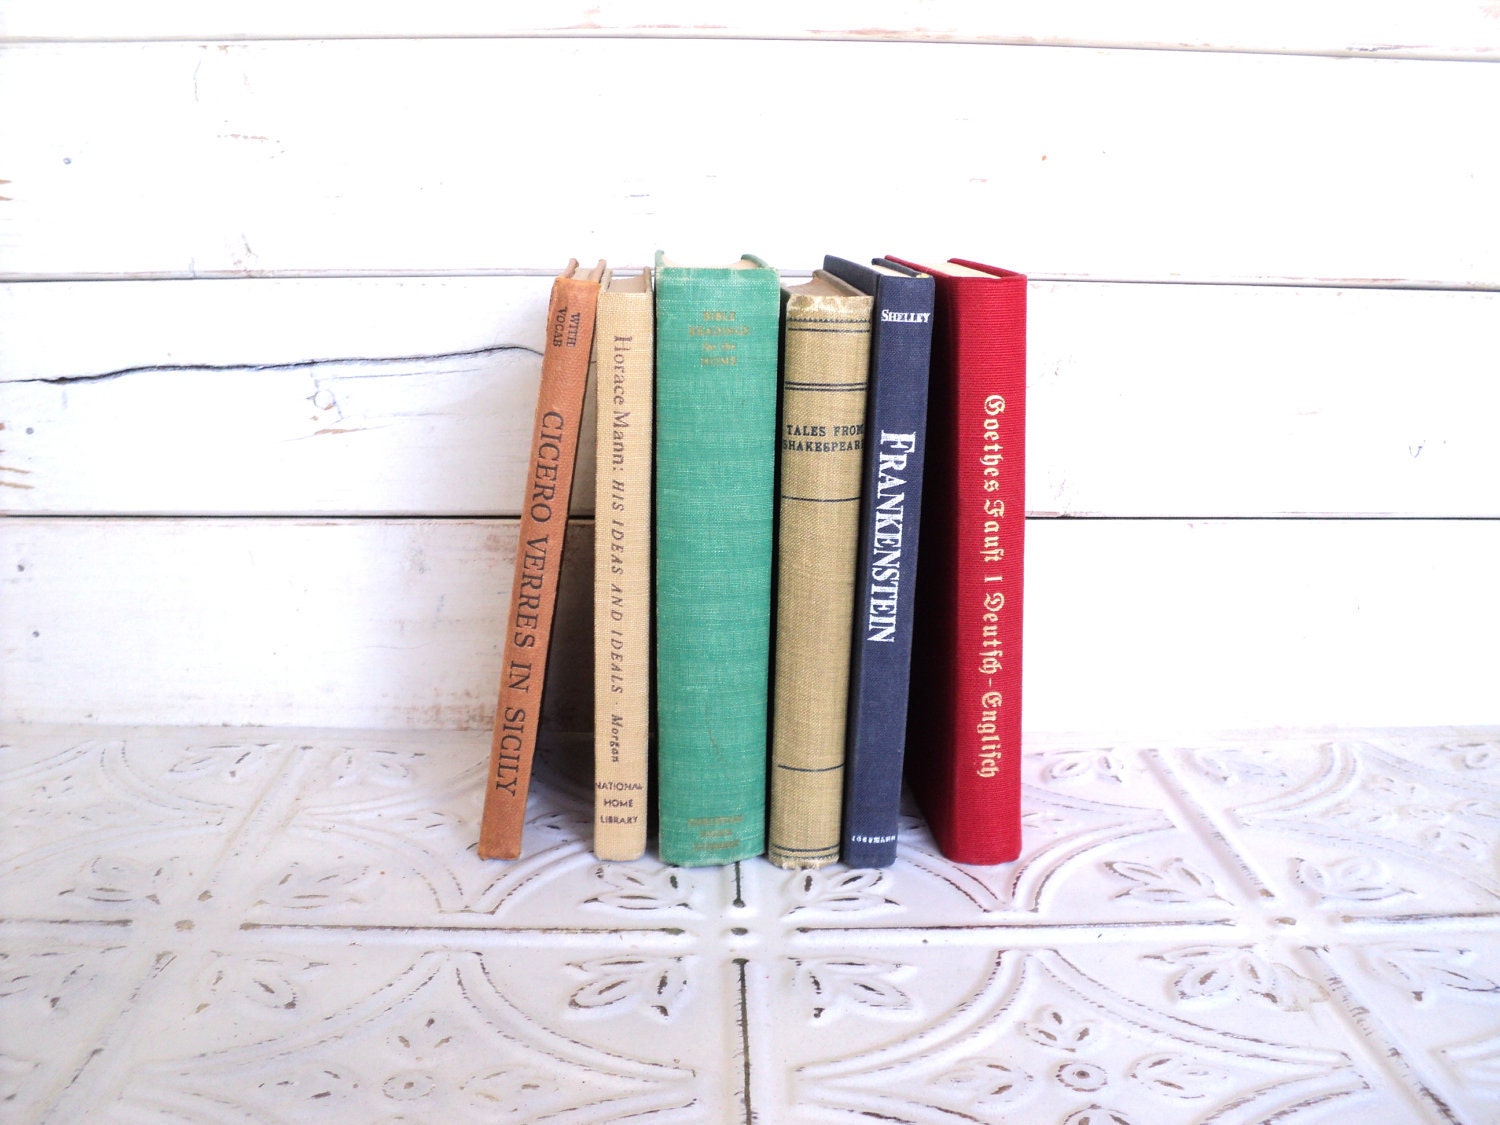 Small Books Instant Library Collection Books by Color Bundle Vintage Decorative Books Photography Props Red, Blue, Tan, Teal - sorrythankyou79